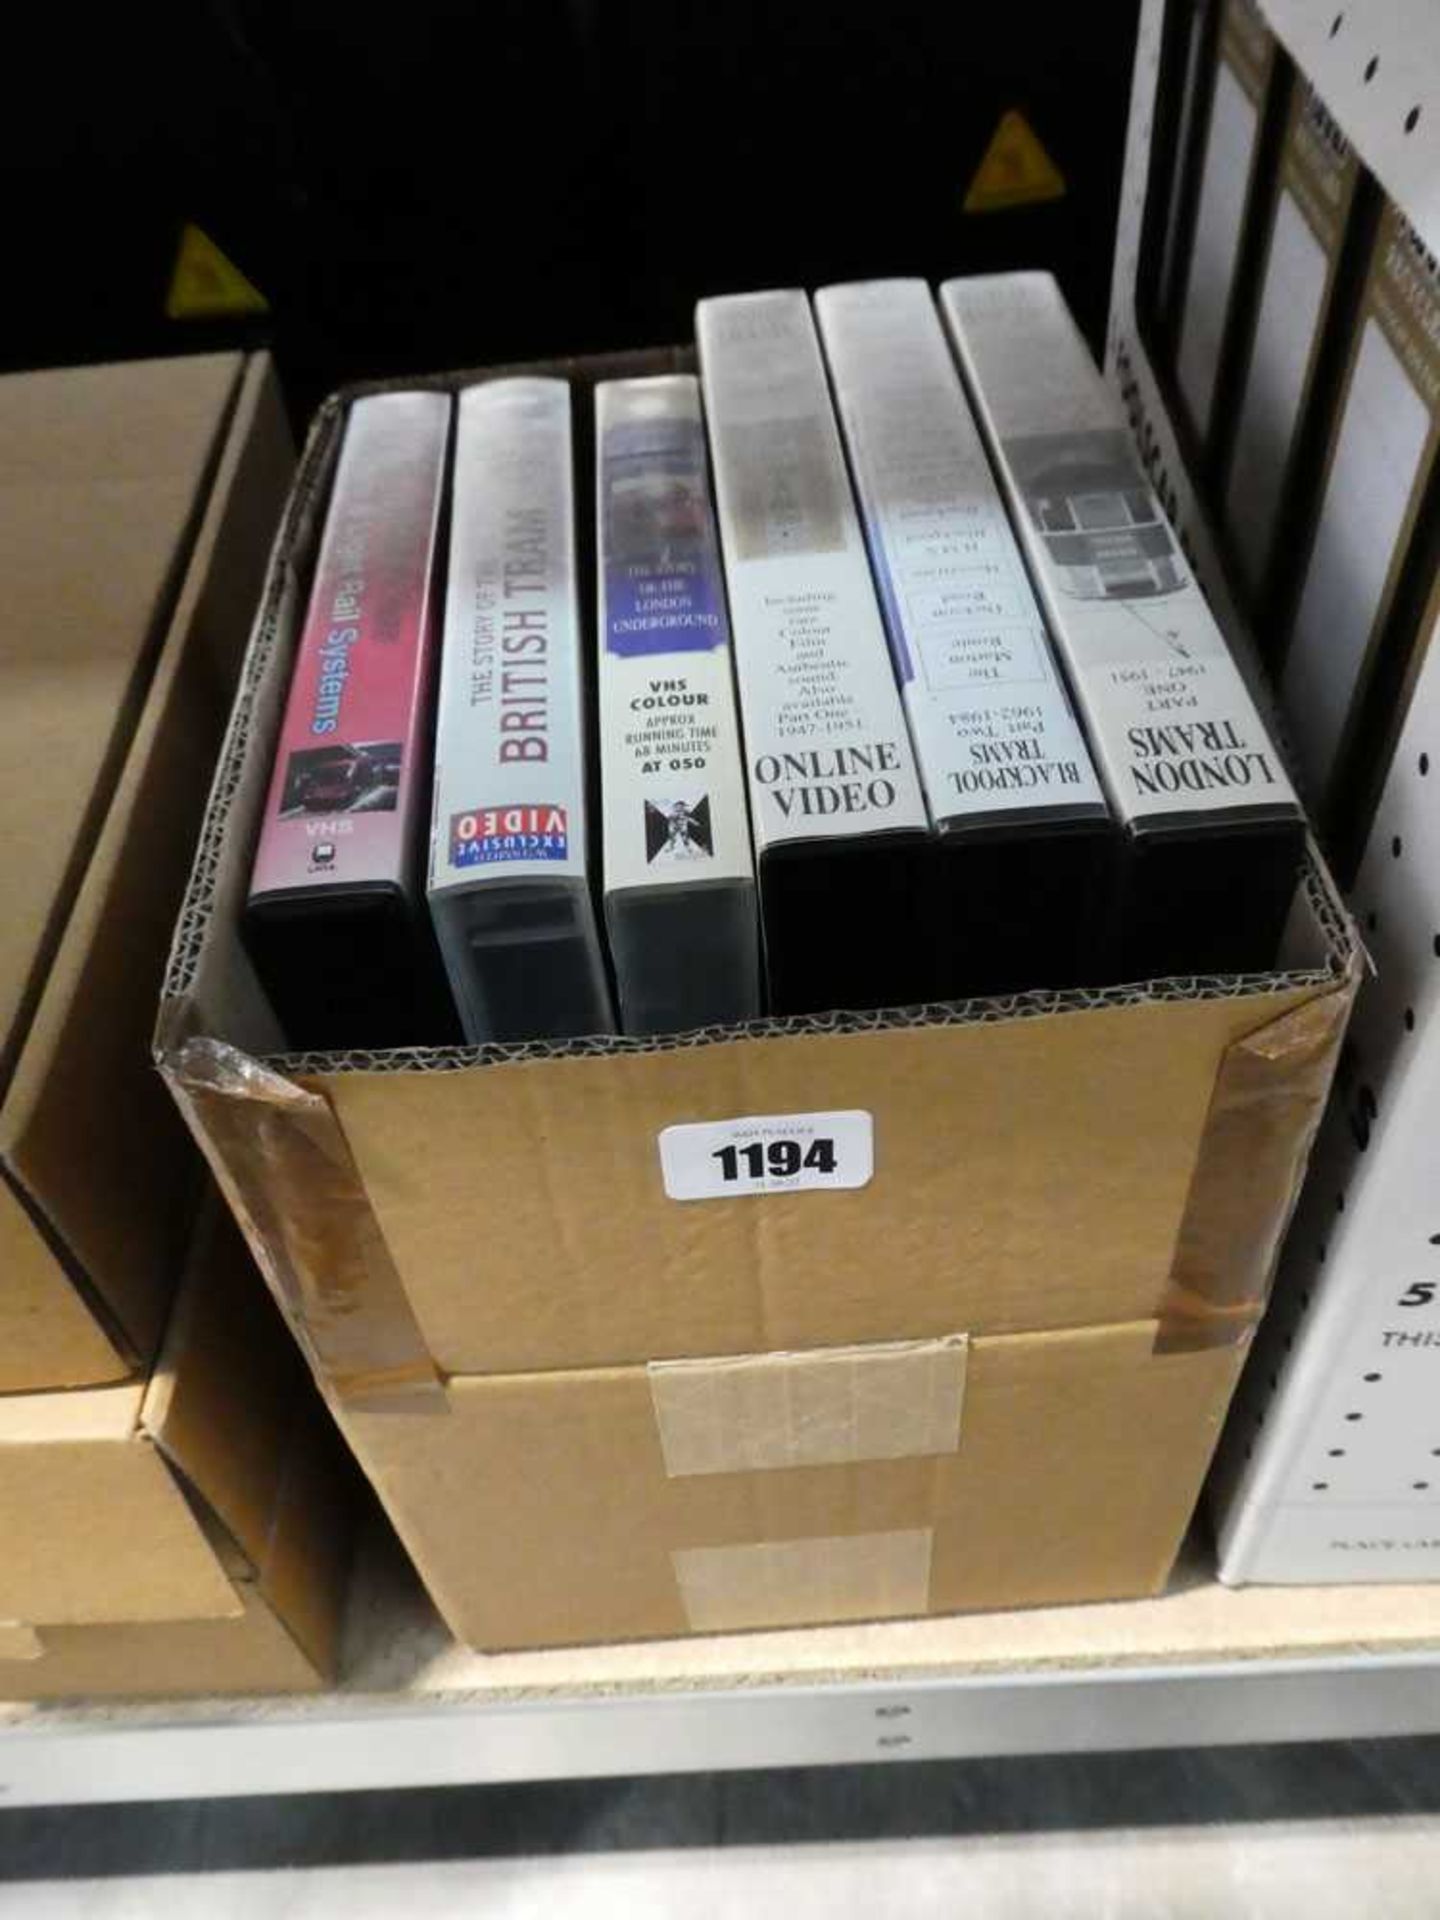 Small box of VHS tapes on the theme of steam locomotives and trams